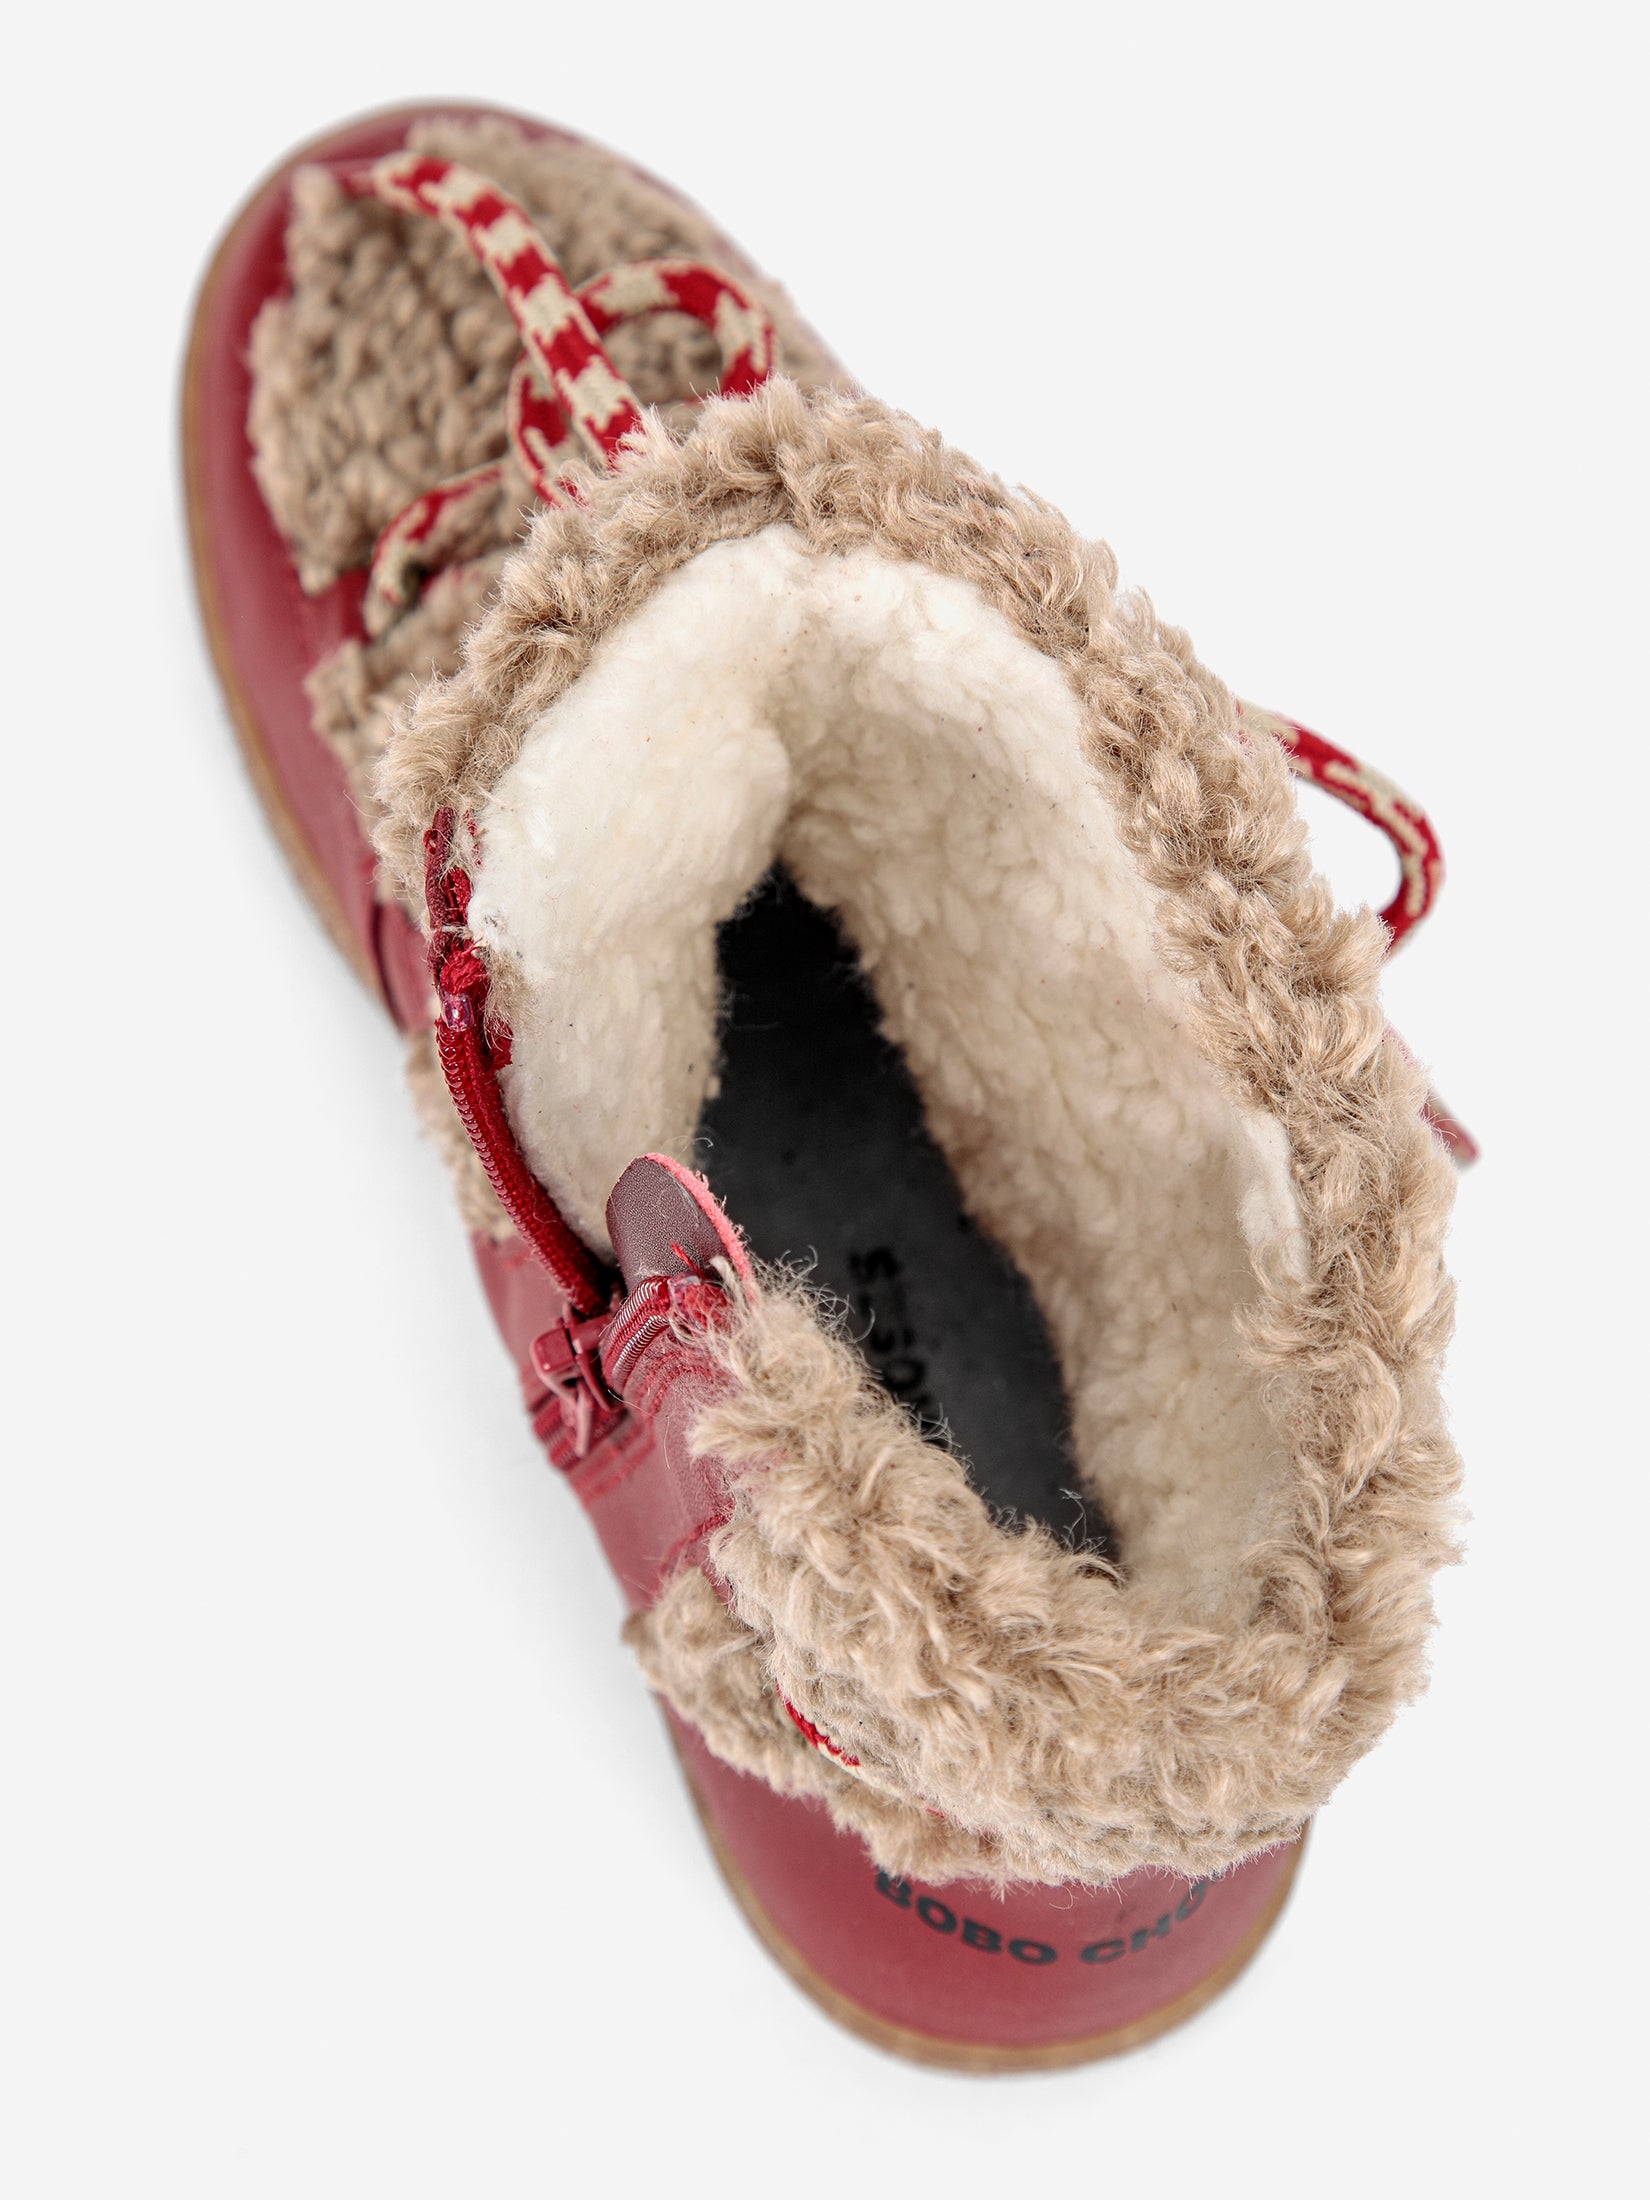 BOBO CHOSES / Suede boots